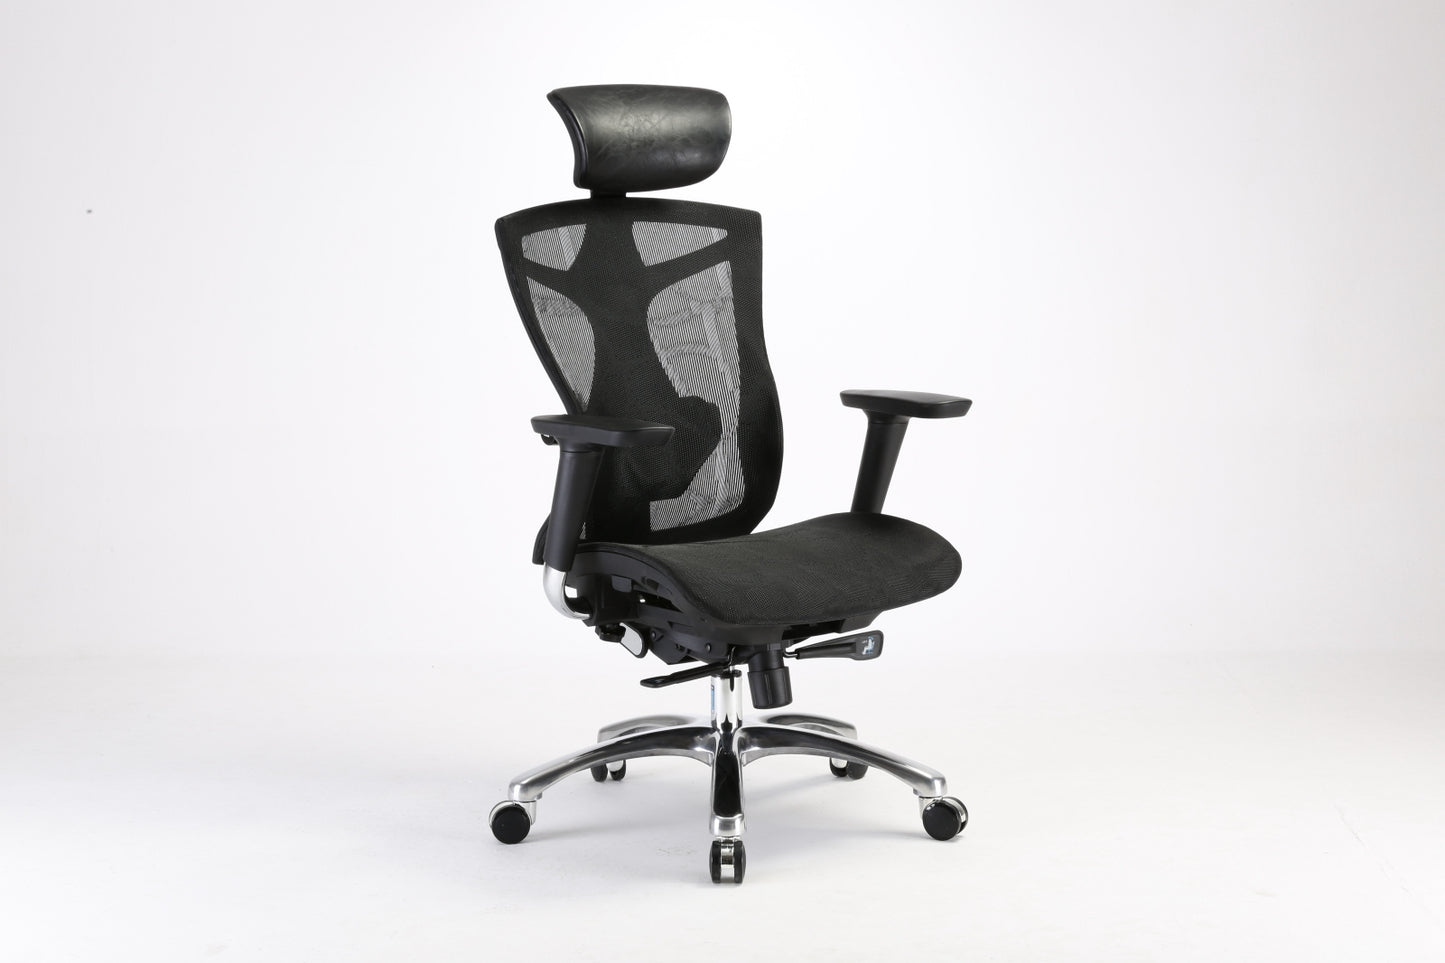 Sihoo V1 Classic Ergonomic Chair (without footrest)